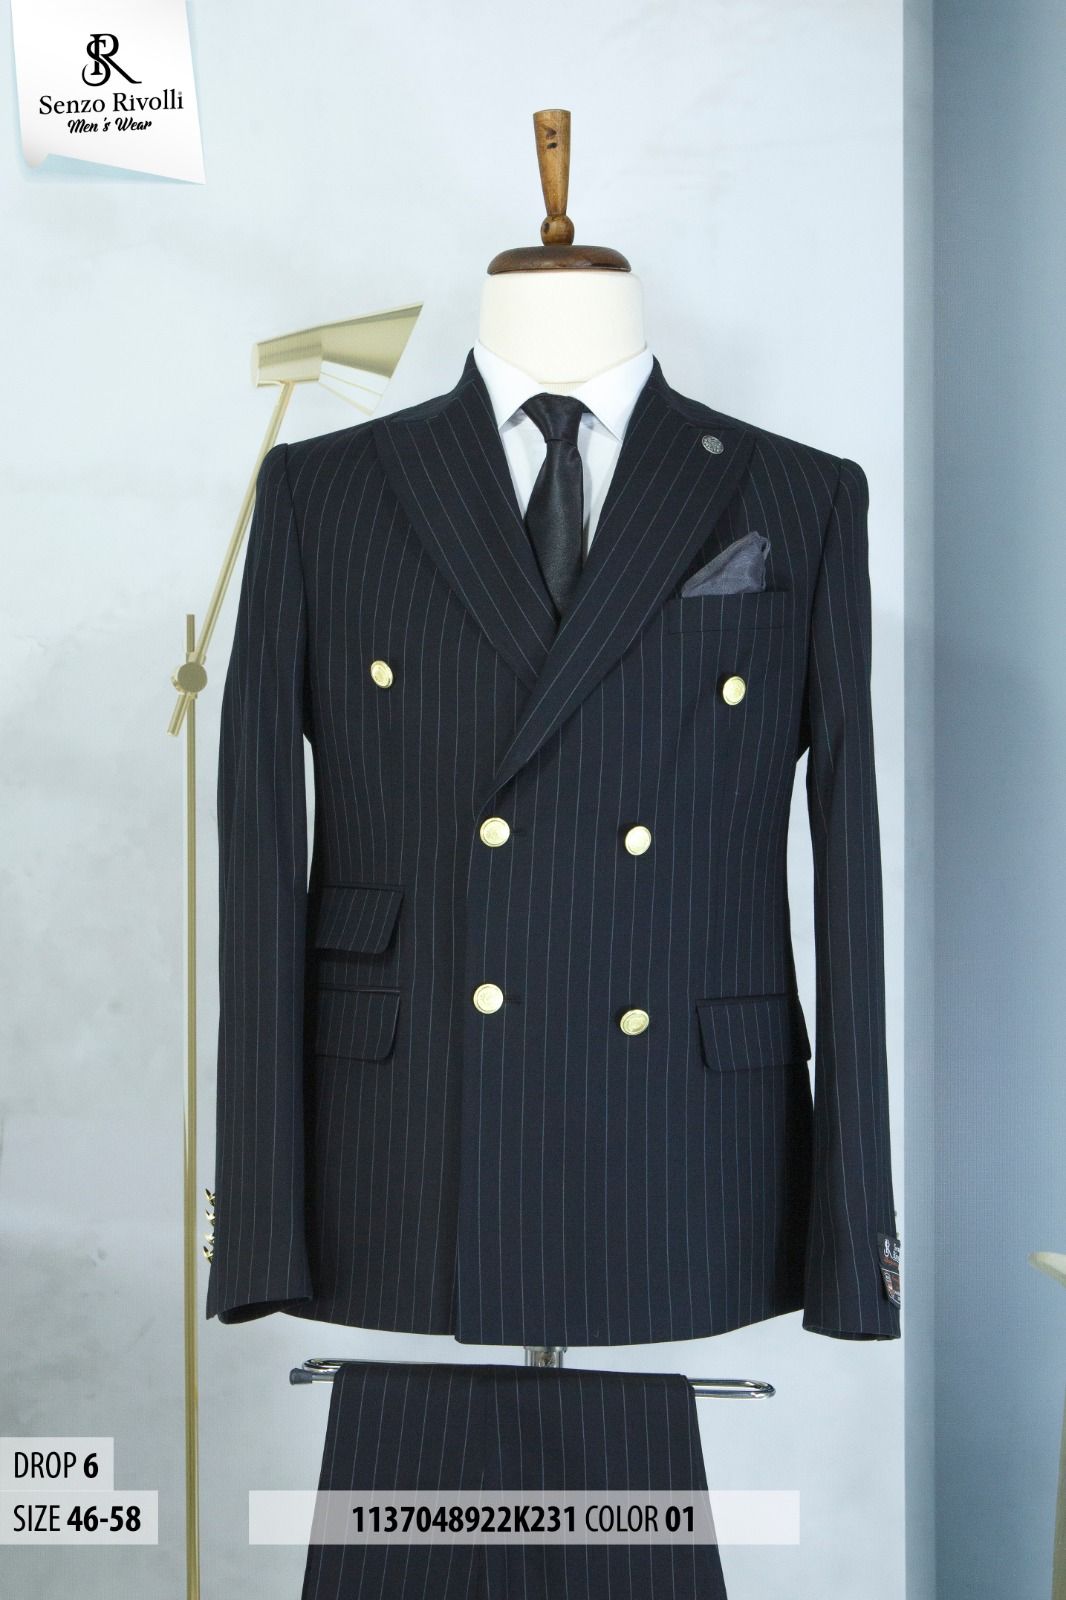 EXECUTIVE DARK GREY BREASTED TURKEY SUIT WITH GOLDEN BUTTON-deluxe.com.ng